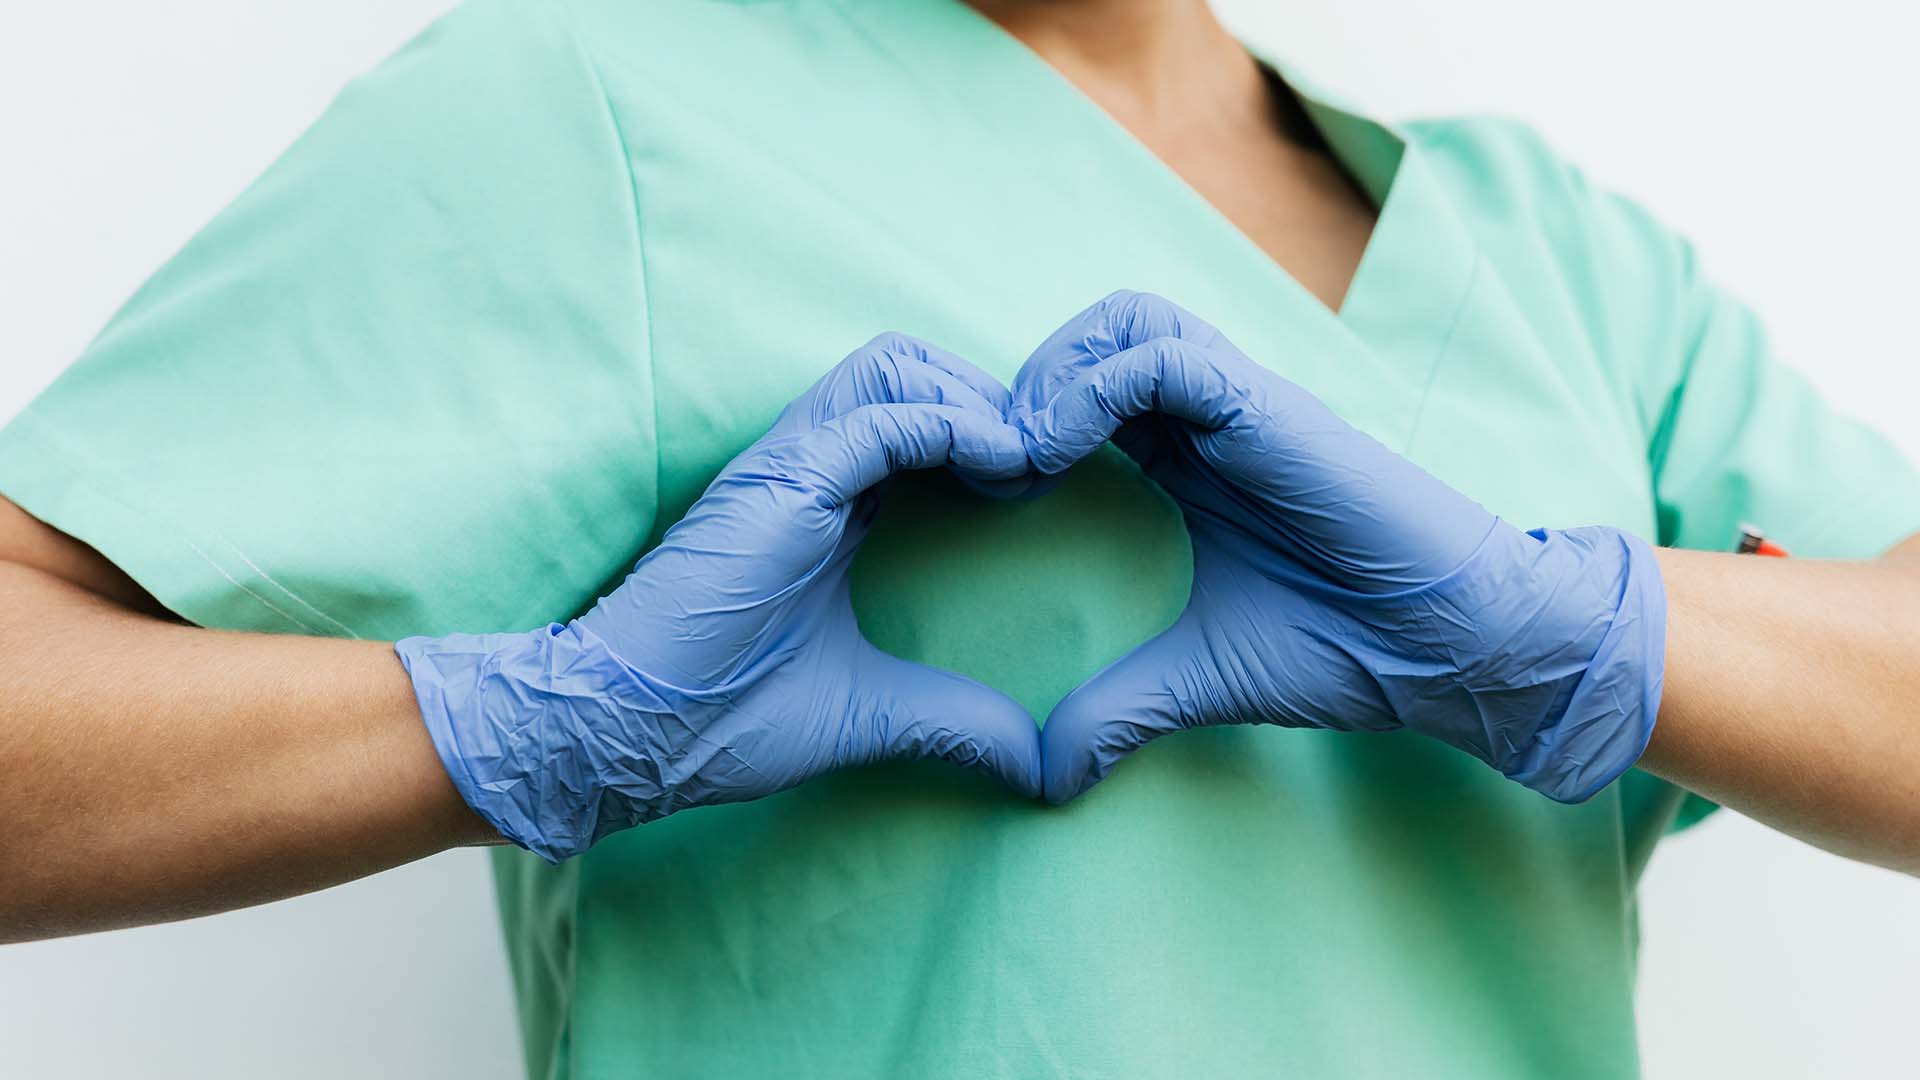 Person in scrubs making heart hands with gloved hands